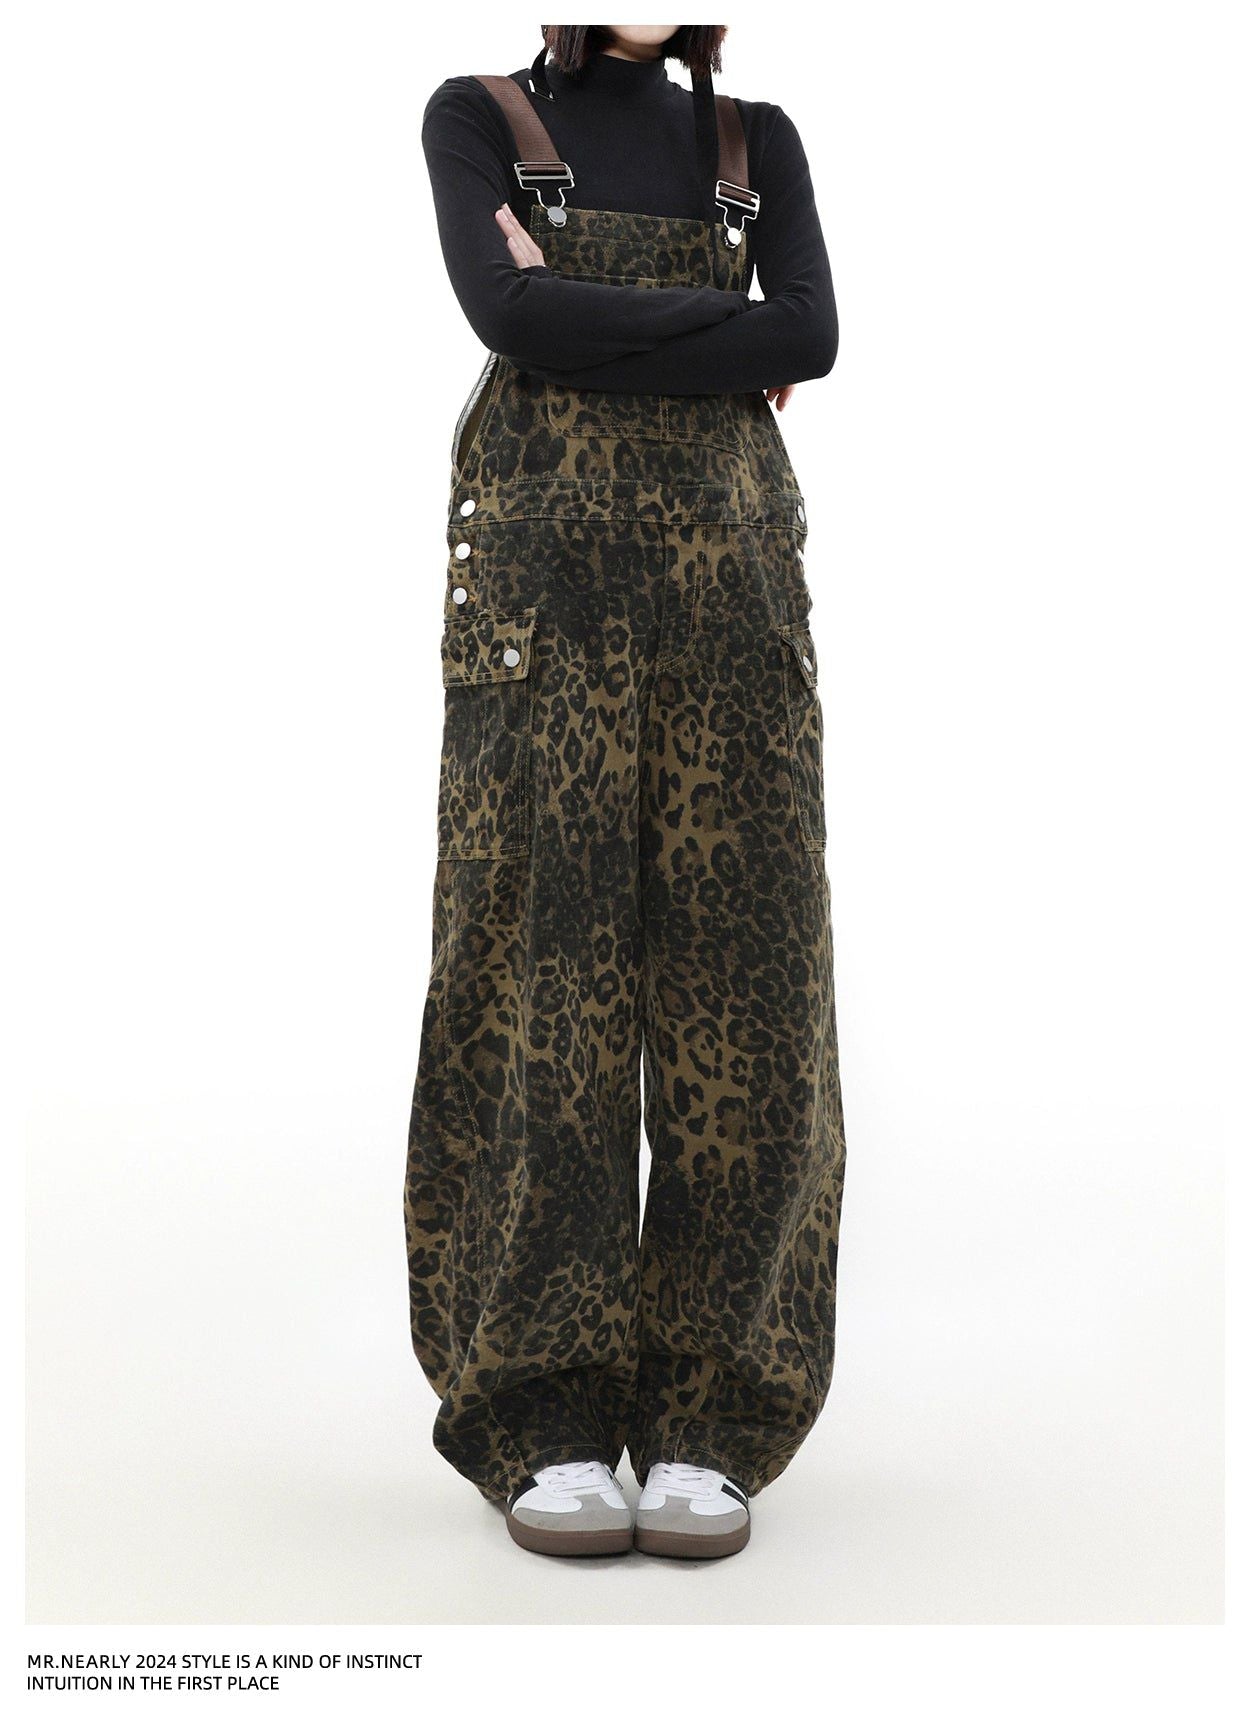 Leopard Print Buttoned Overall Korean Street Fashion Pants By Mr Nearly Shop Online at OH Vault